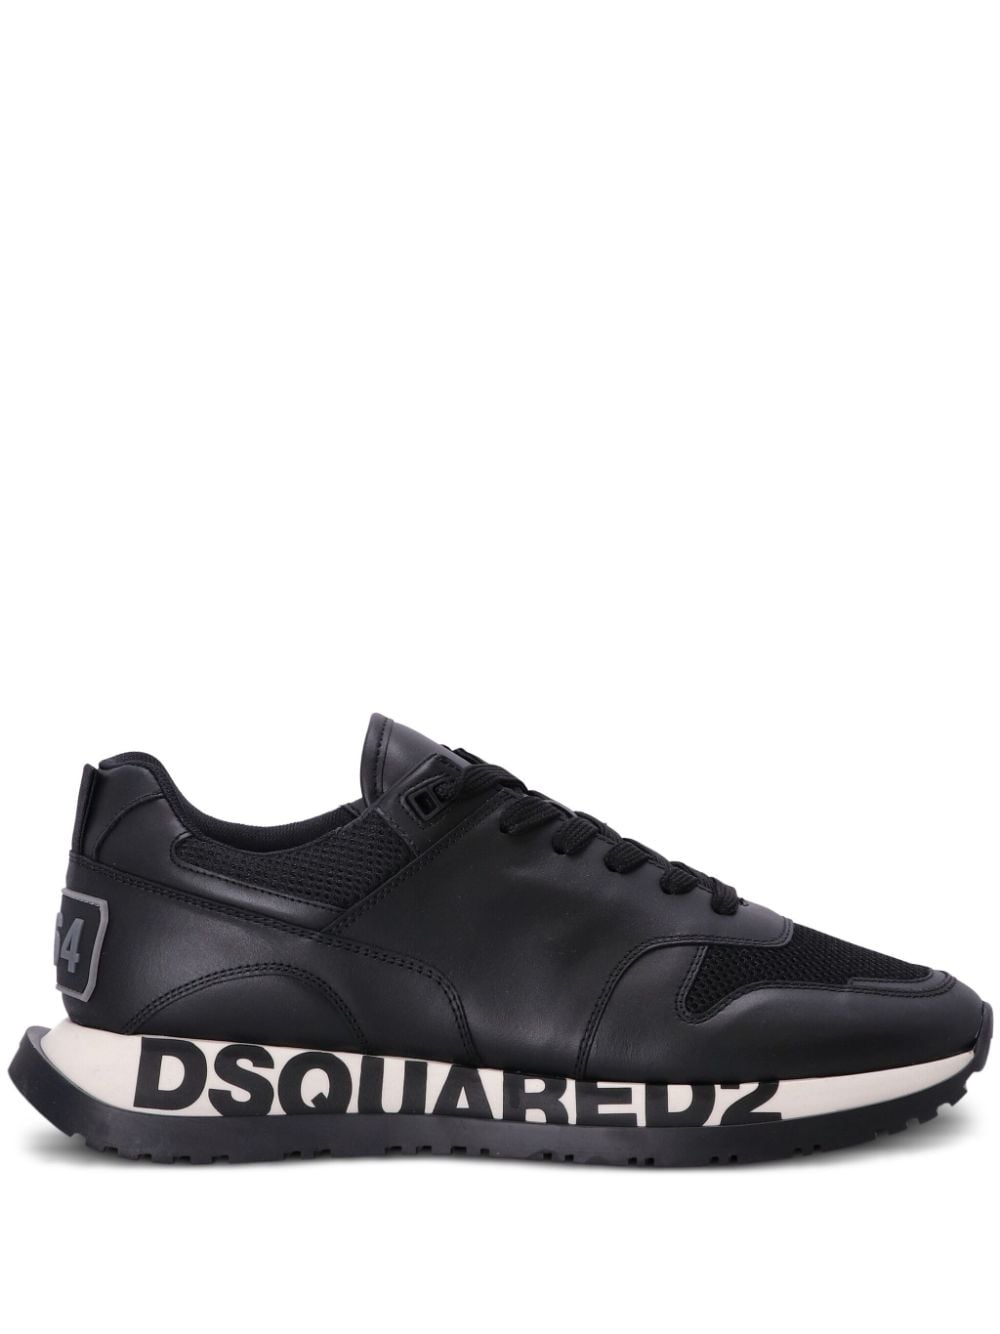 Dsquared2 Running leather sneakers - Black von Dsquared2